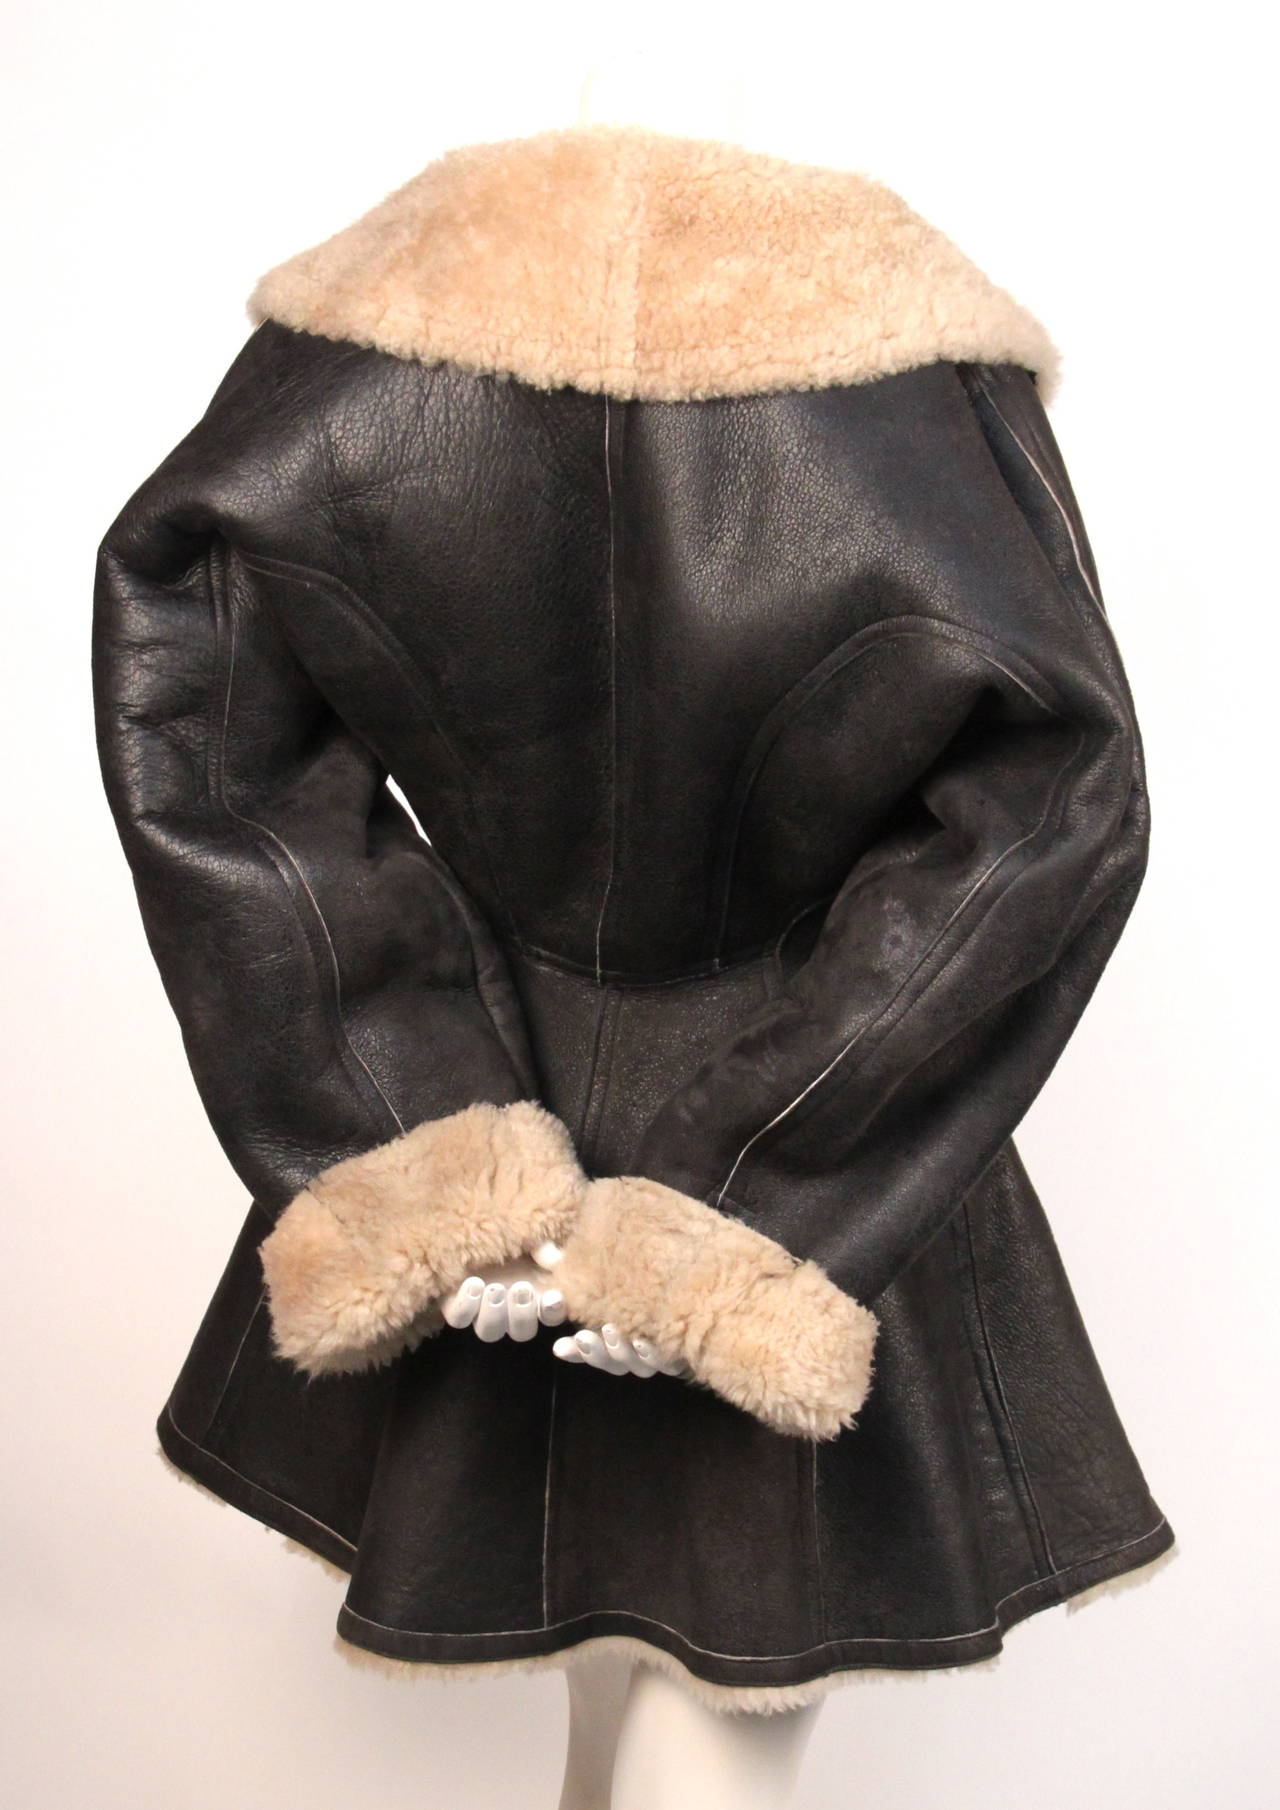 Brown shearling coat with flared hem designed by Azzedine Alaia dating to 1987. Coat is labeled a French size 38.  Zip closure. Pockets at hips. Made in France. Very good condition.